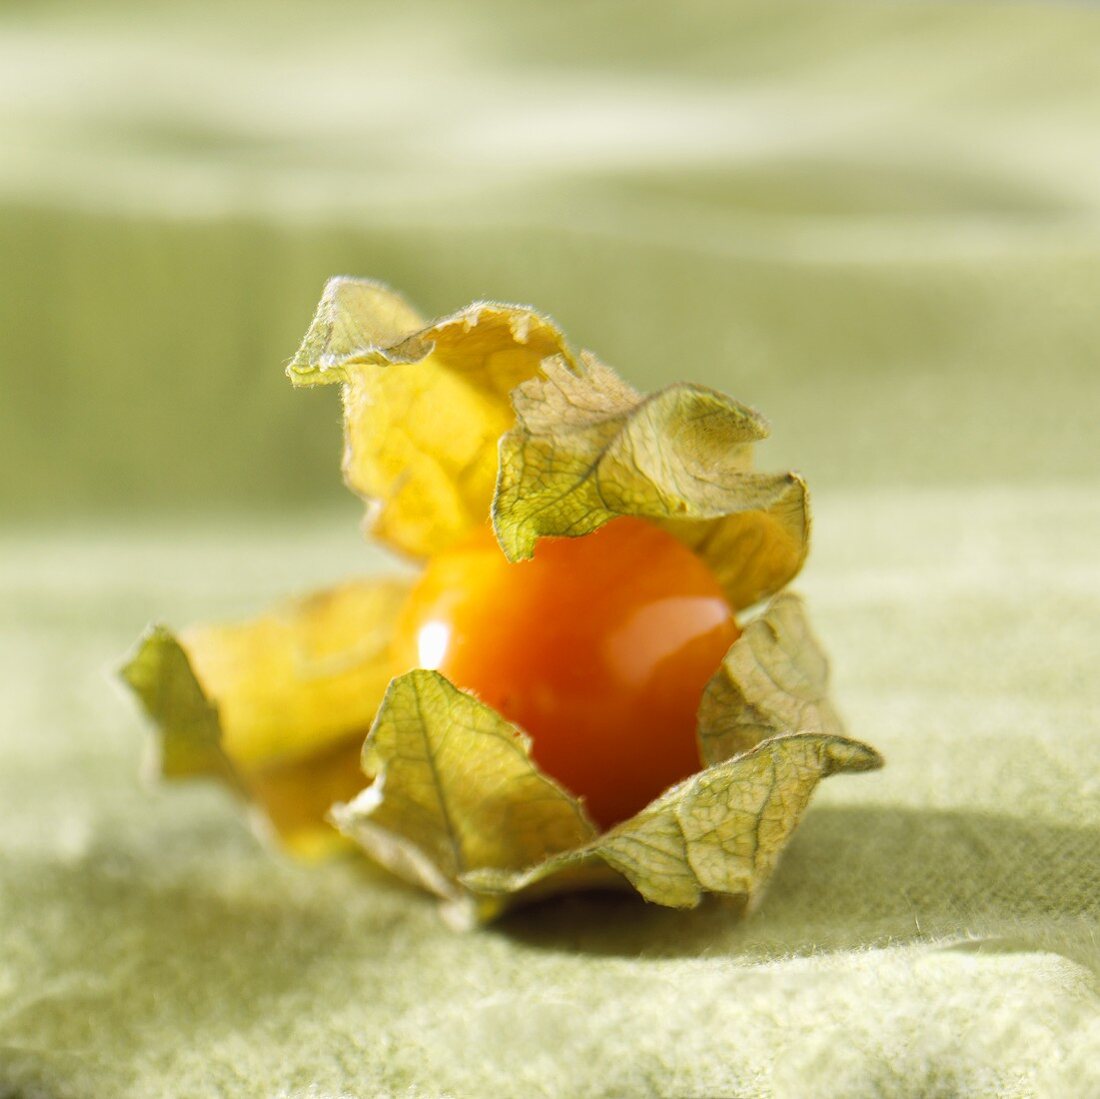 A Cape gooseberry with husk